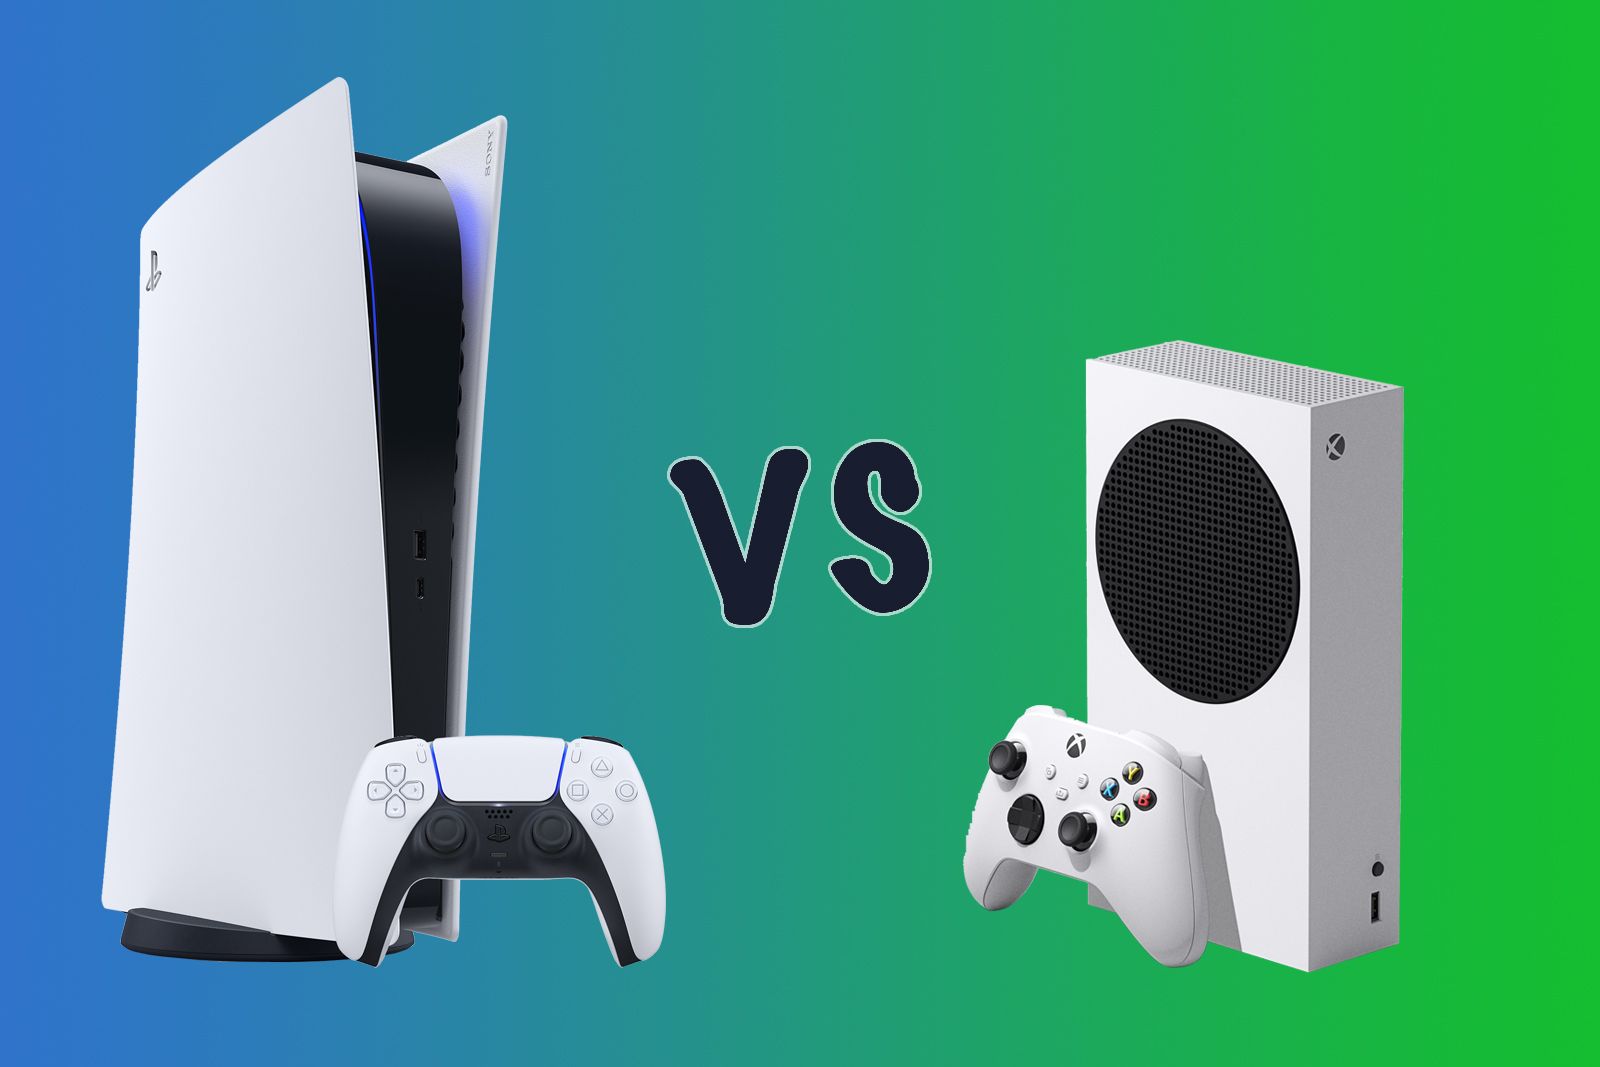 Is the PS5 digital edition better than the Xbox series S? - Quora